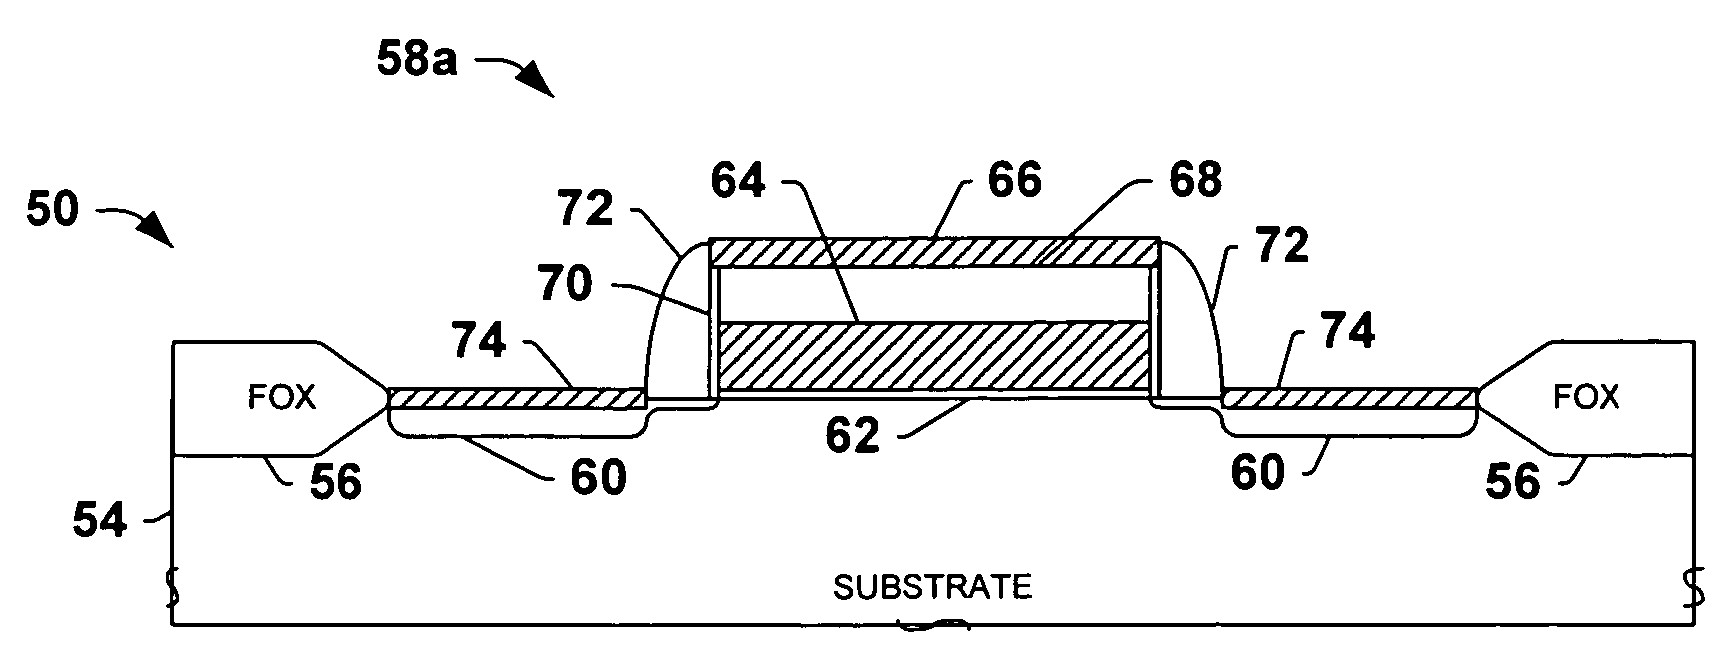 MOS transistor gates with thin lower metal silicide and methods for making the same